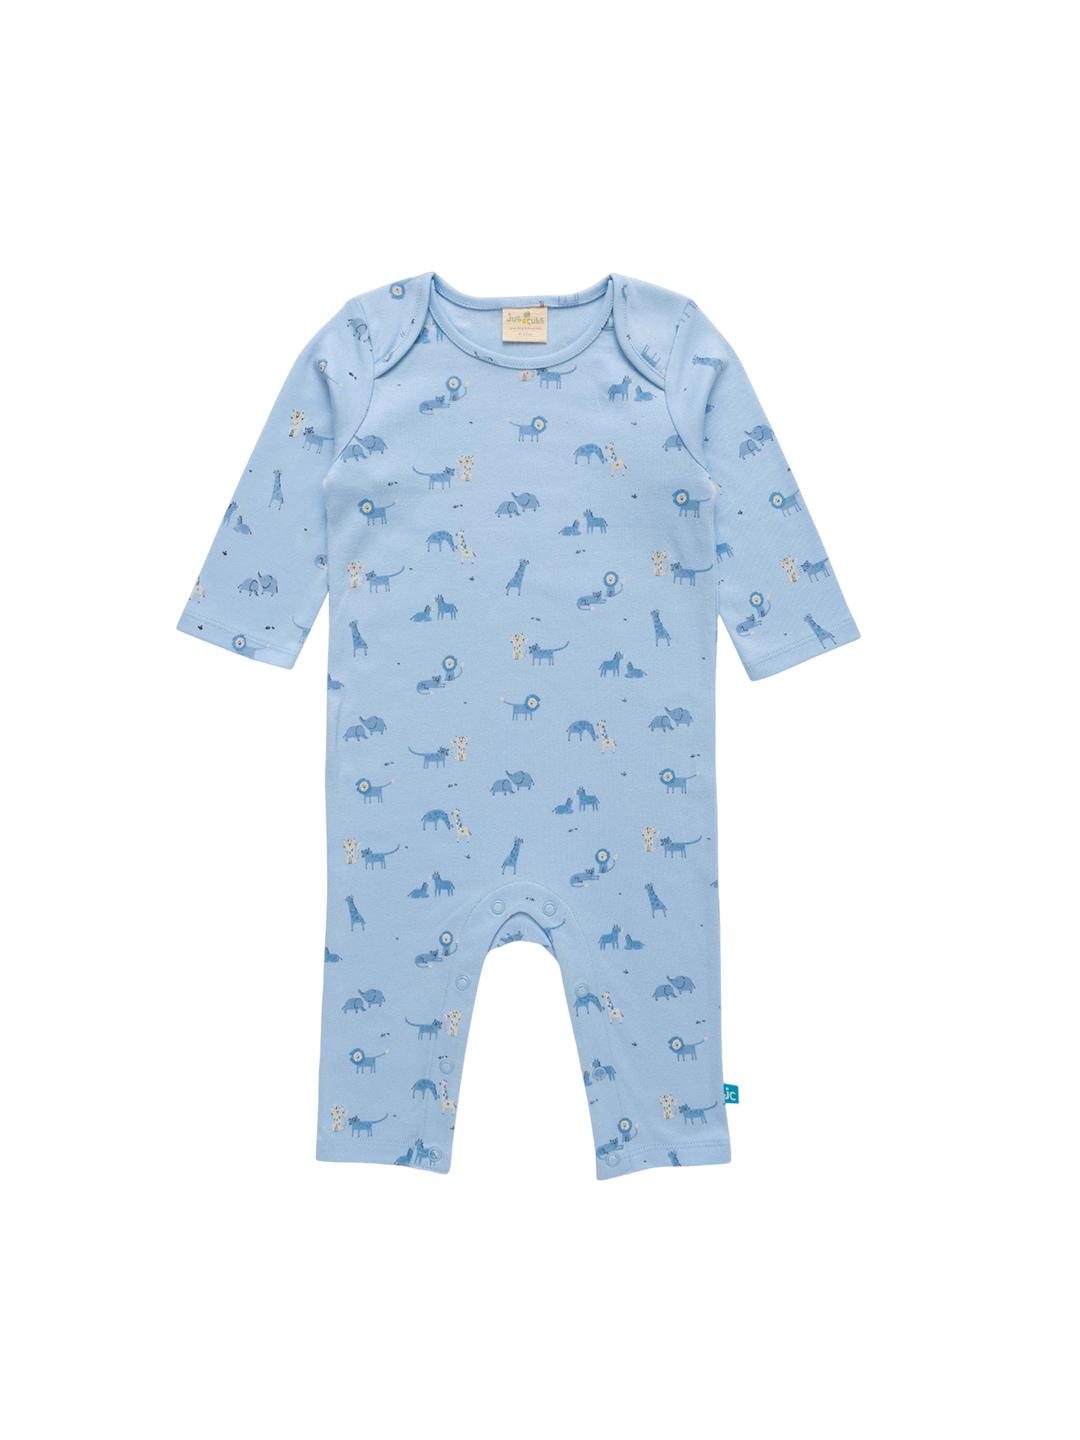 JusCubs Infant Boys Printed Cotton Rompers